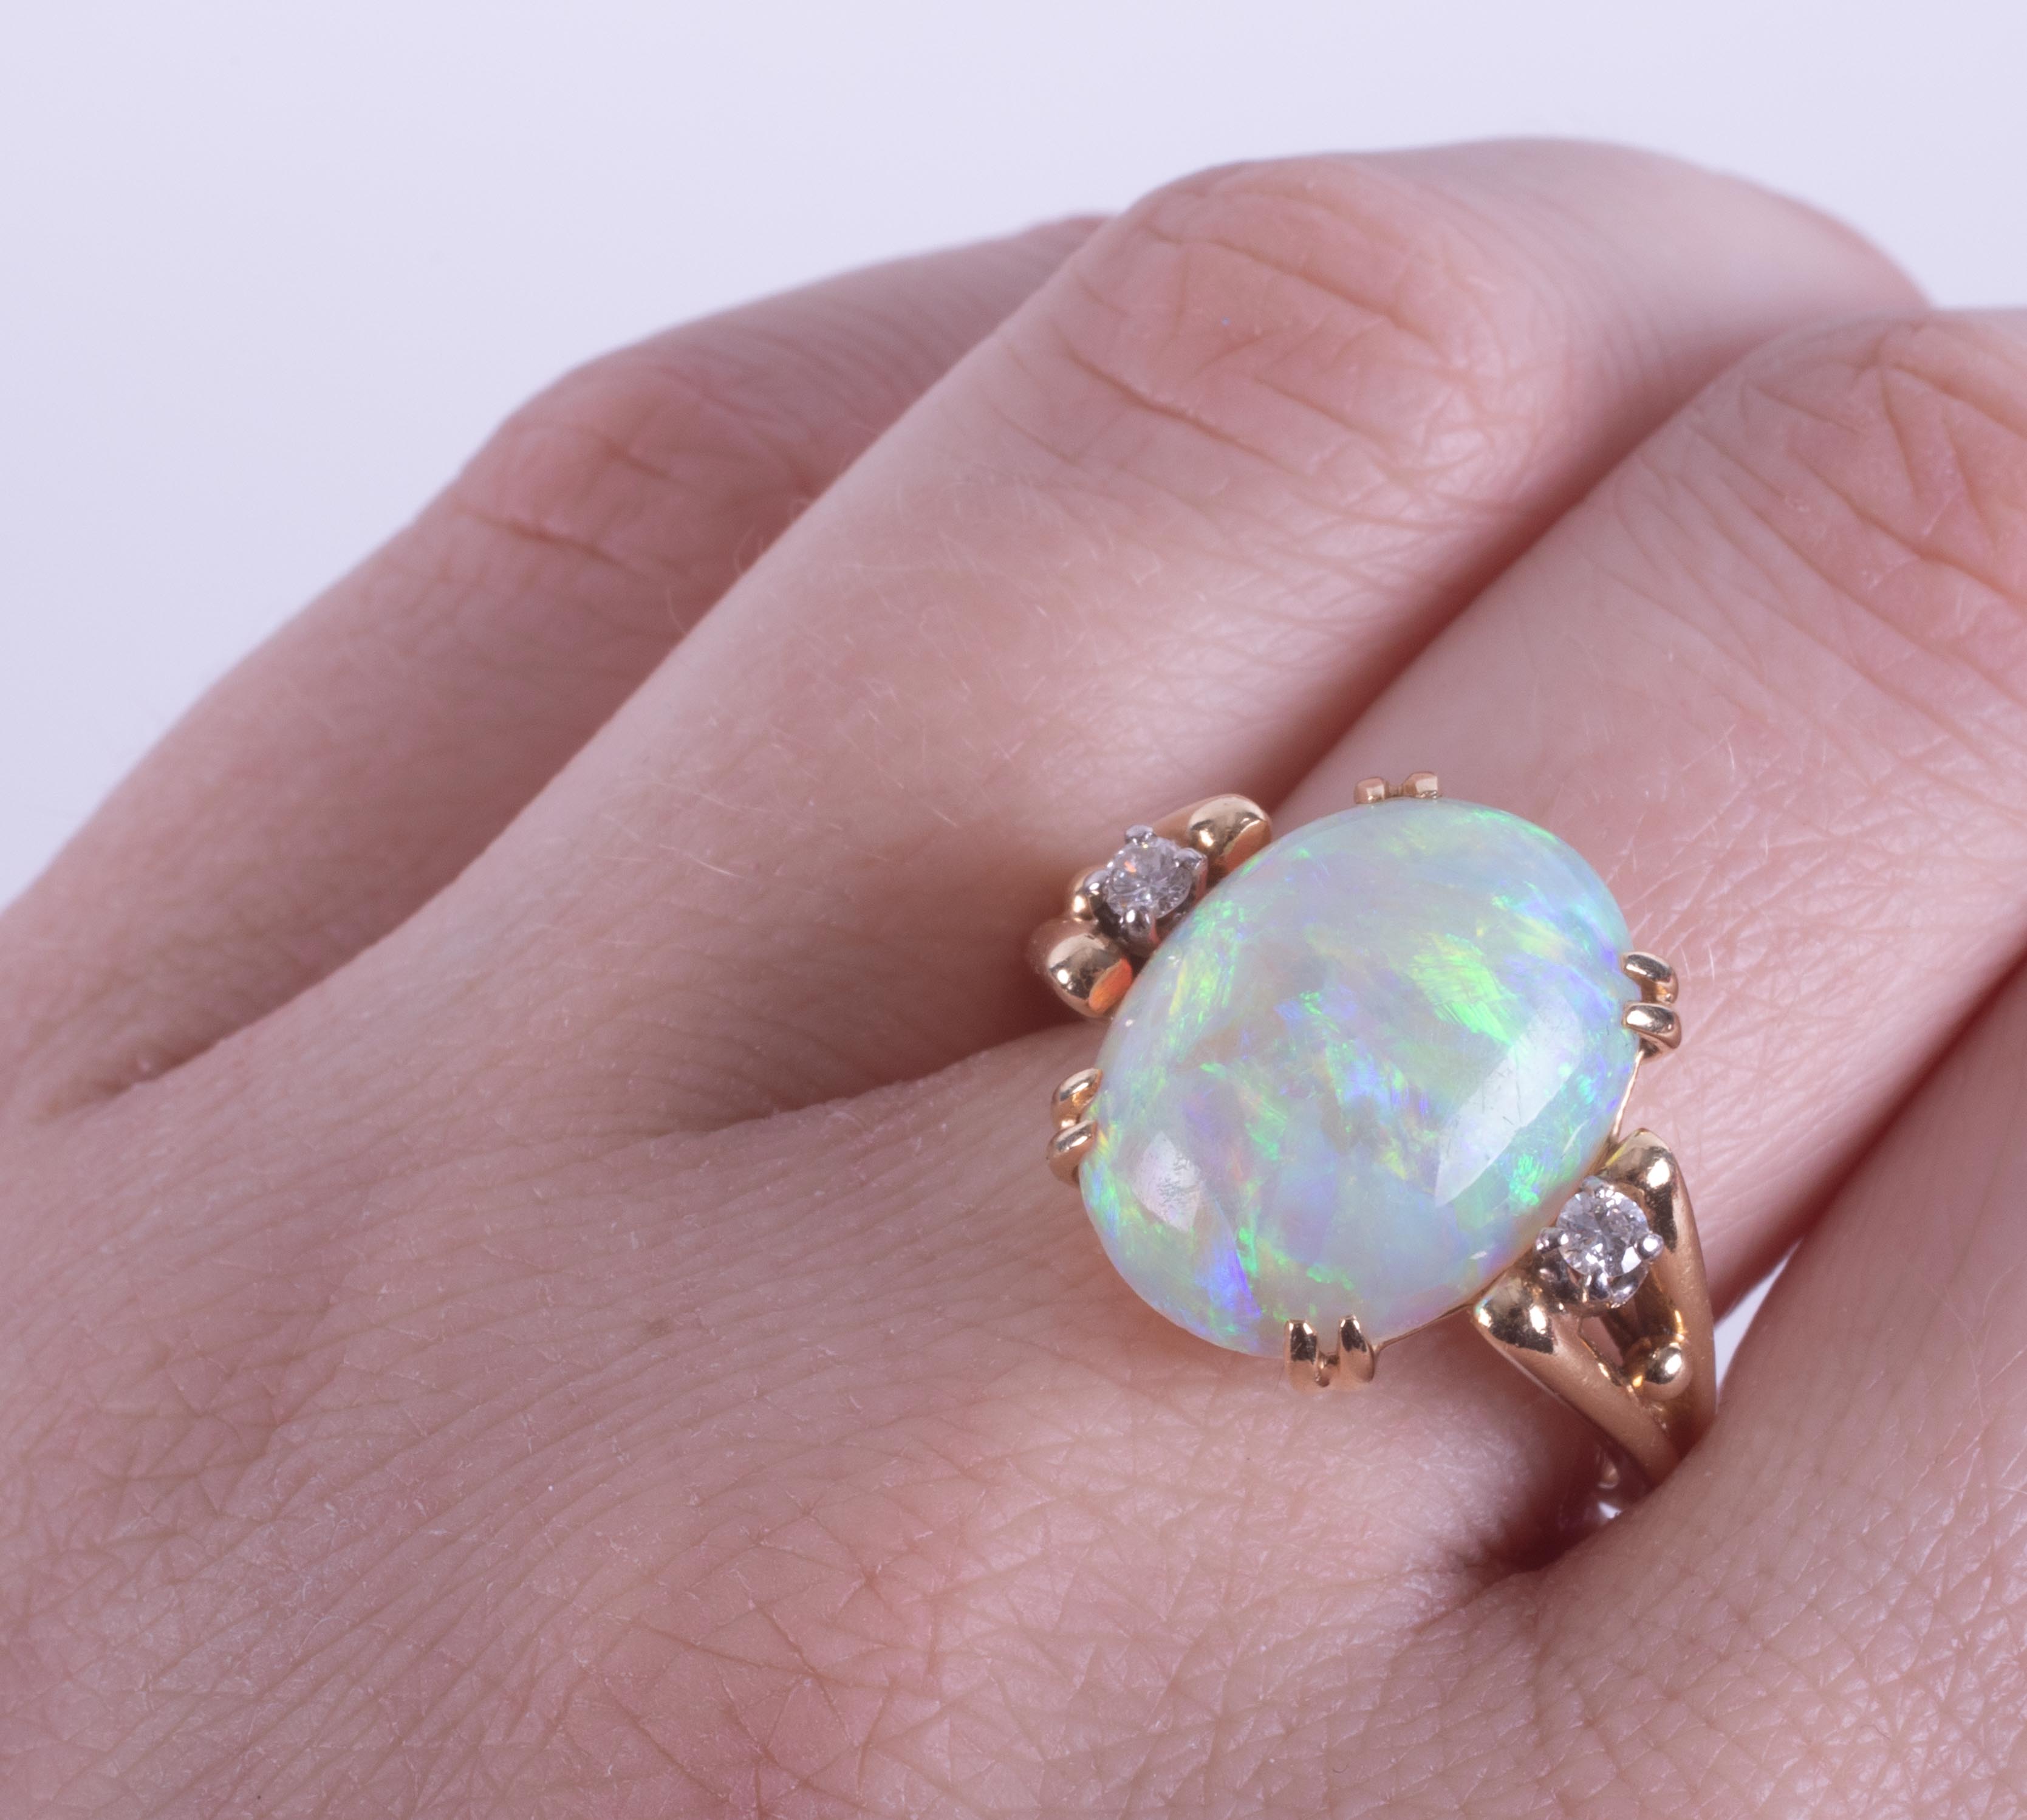 A 14ct yellow gold ring set with a central oval cabochon cut white opal, measuring approx. 15.9mm - Image 2 of 2